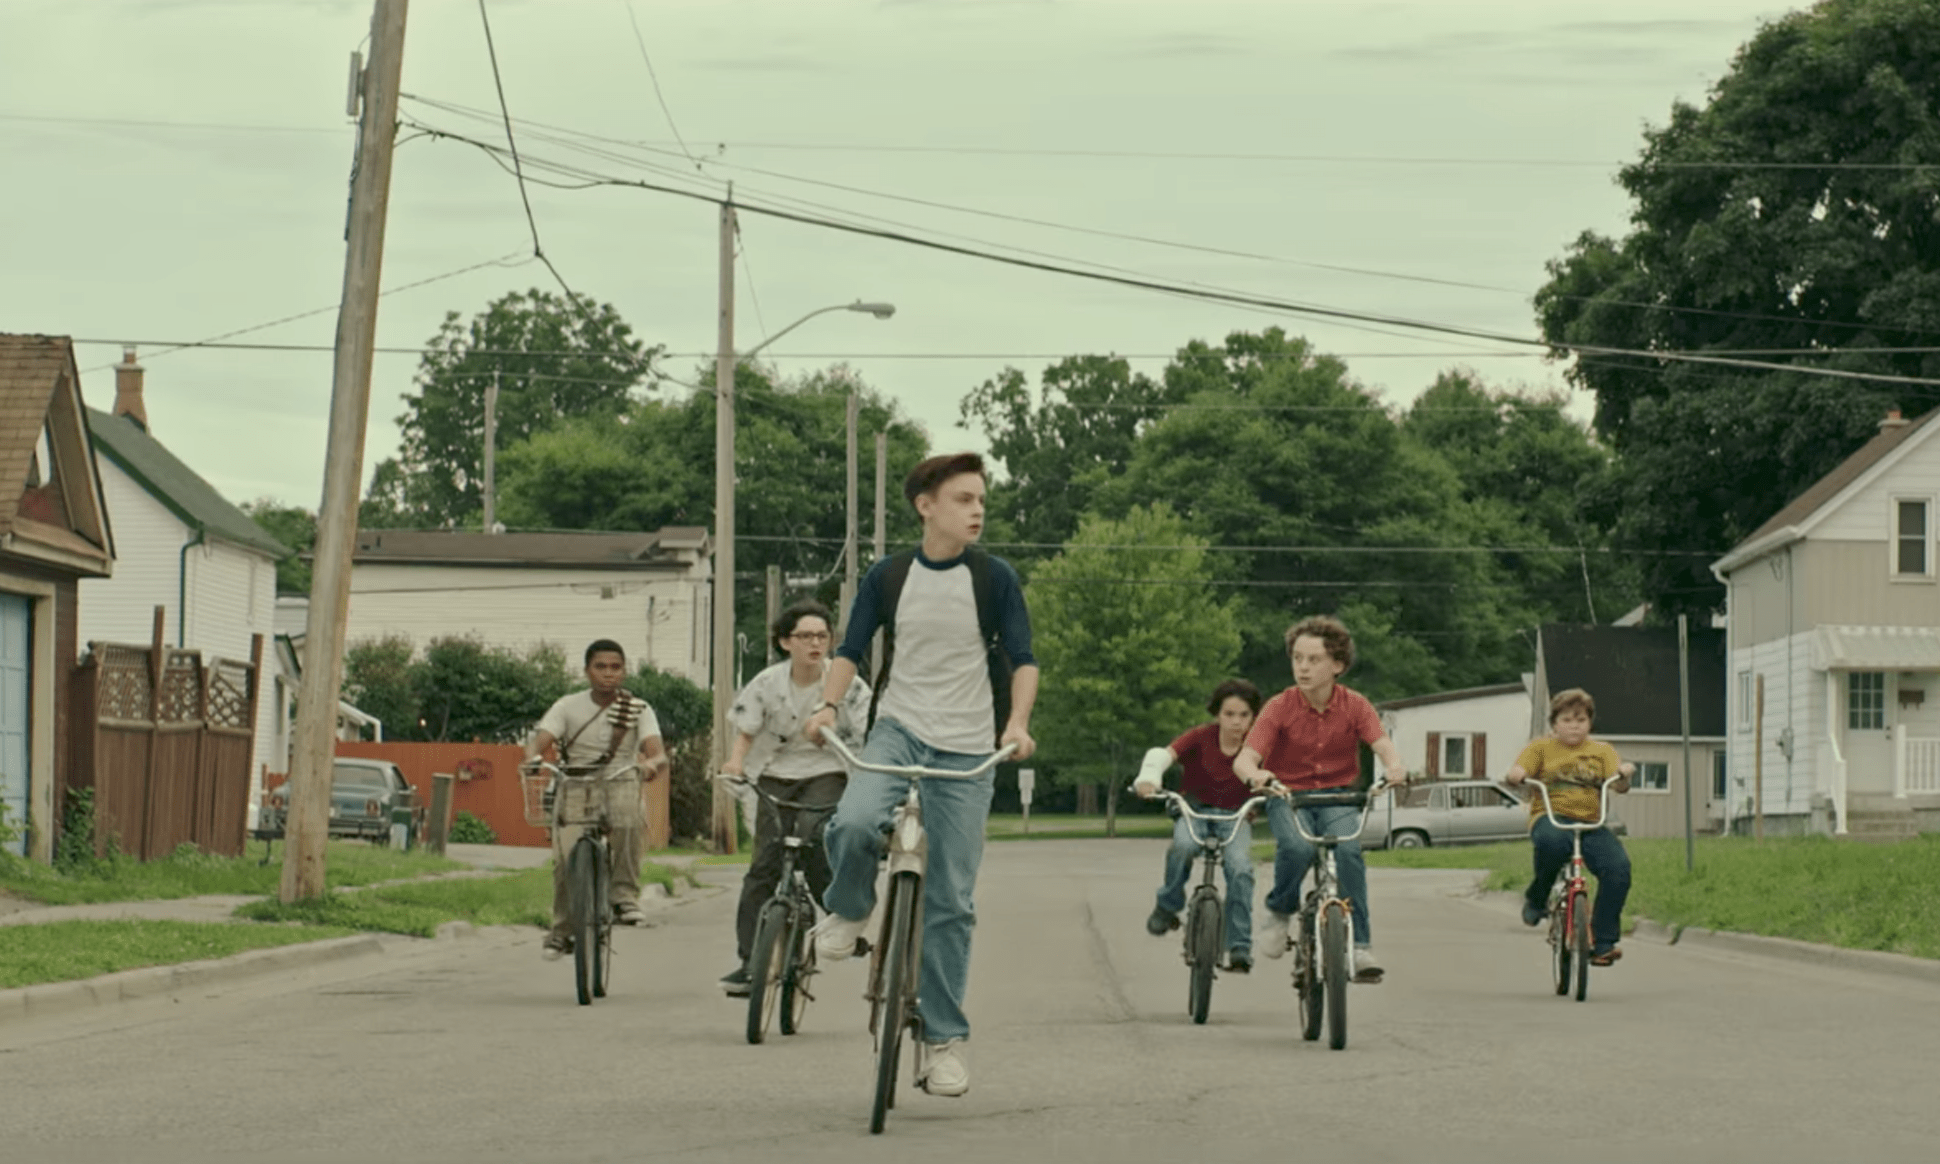 (from left to right) Richie, Stanley, Bill, and Eddie from the 2017 adaption of Stephen King's IT riding their bikes down the street.